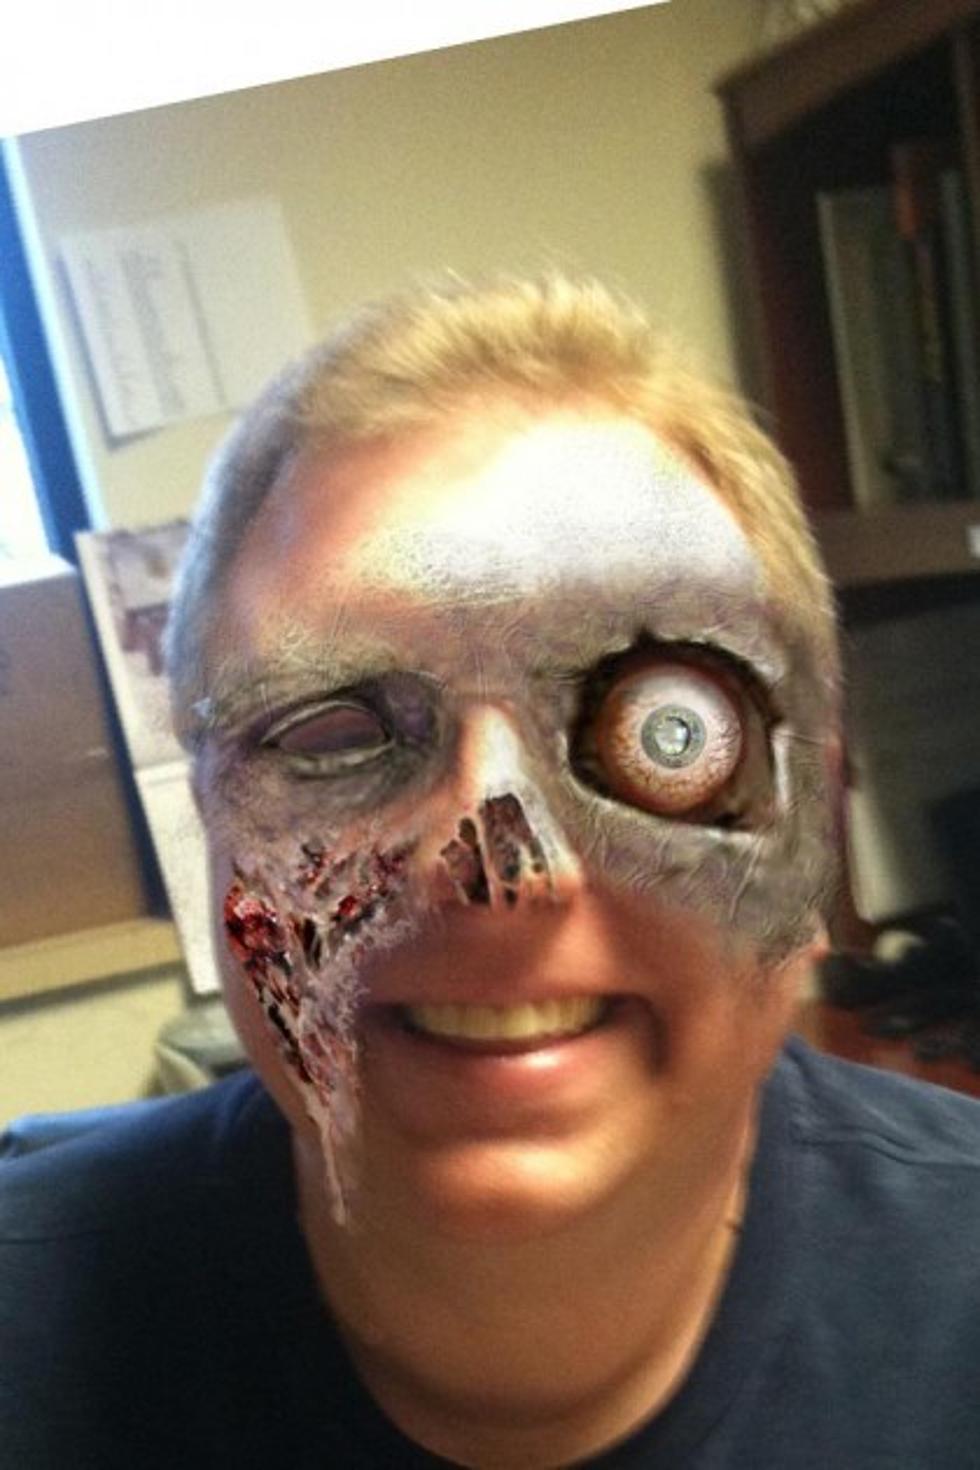 Instant Walking Dead &#8211; Turn Yourself Into a Zombie with the iMut8r App